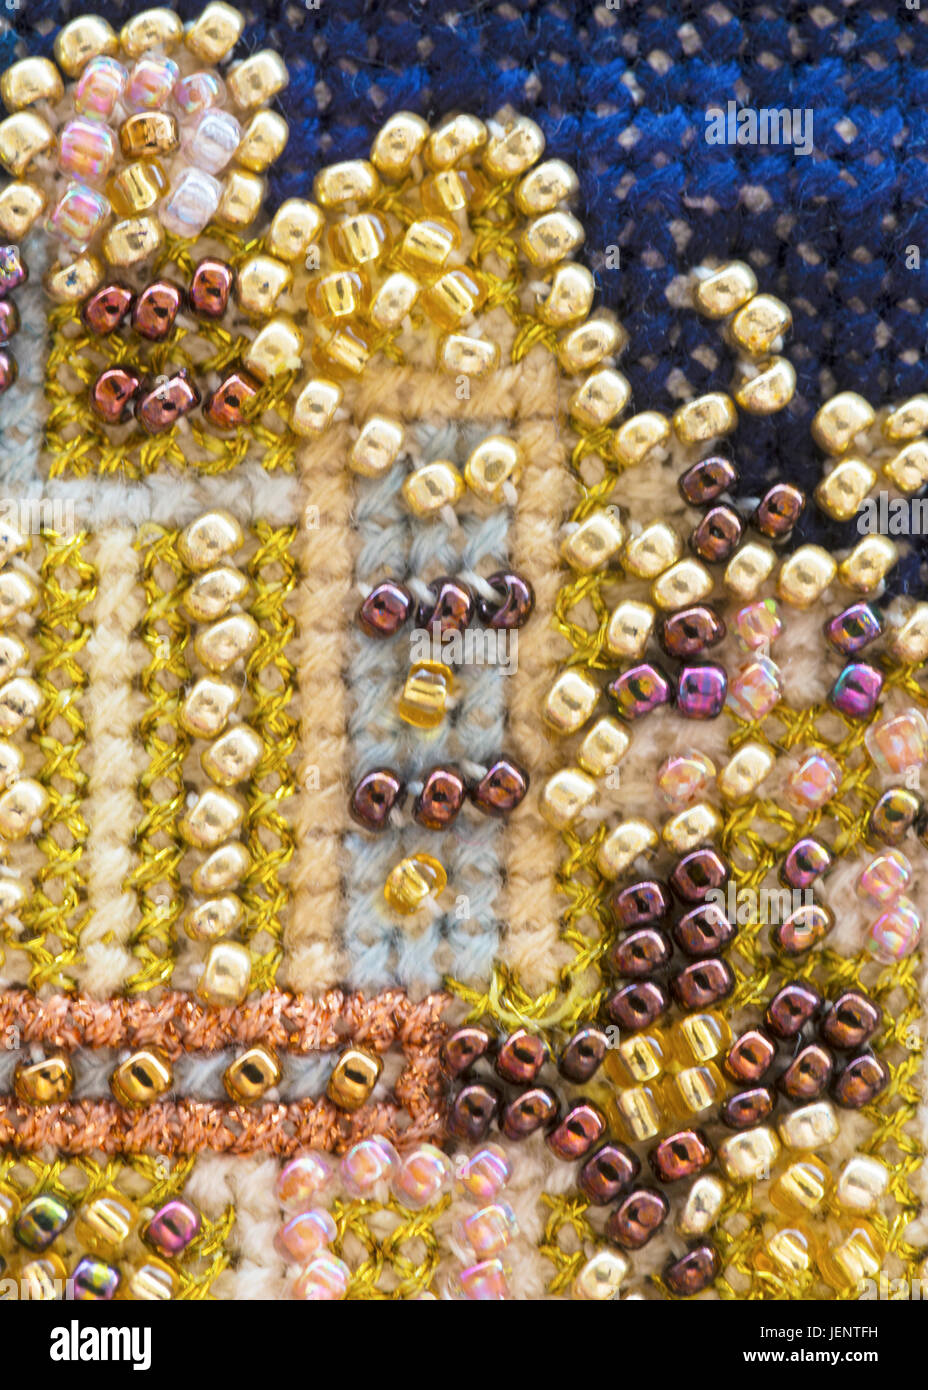 Colourful wooden craft beads pattern Stock Photo - Alamy